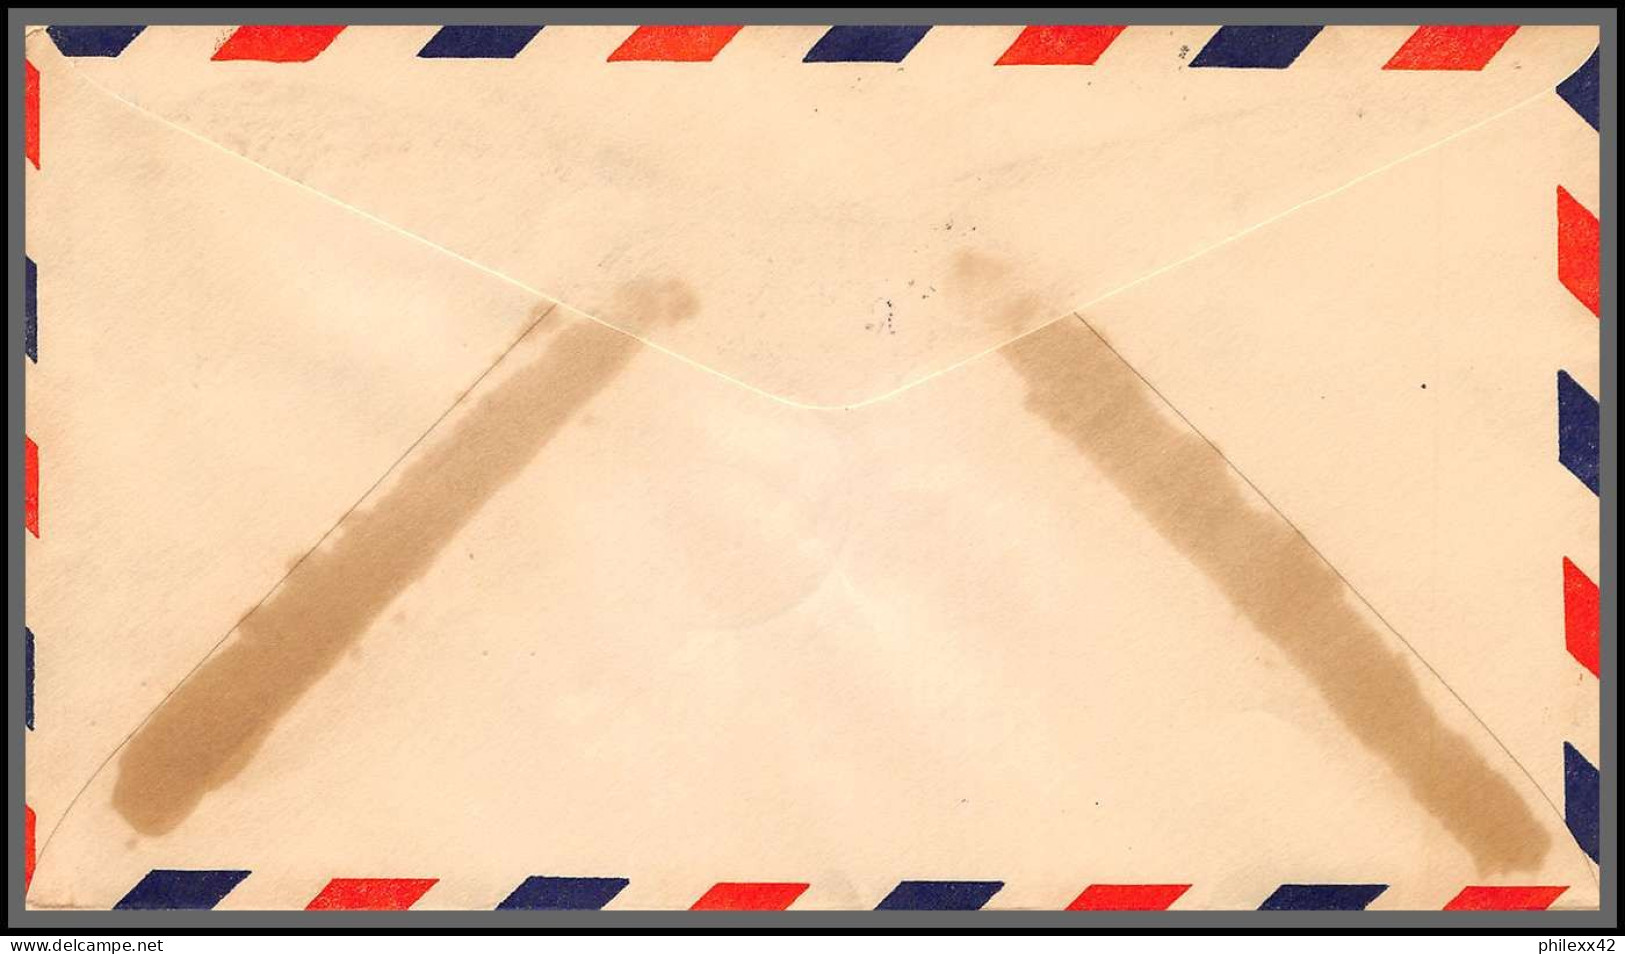 12110 Colosboro 12/10/1937 Premier Vol First All North Carolina Air Mail Flights Lettre Airmail Cover Usa Aviation - 1c. 1918-1940 Covers